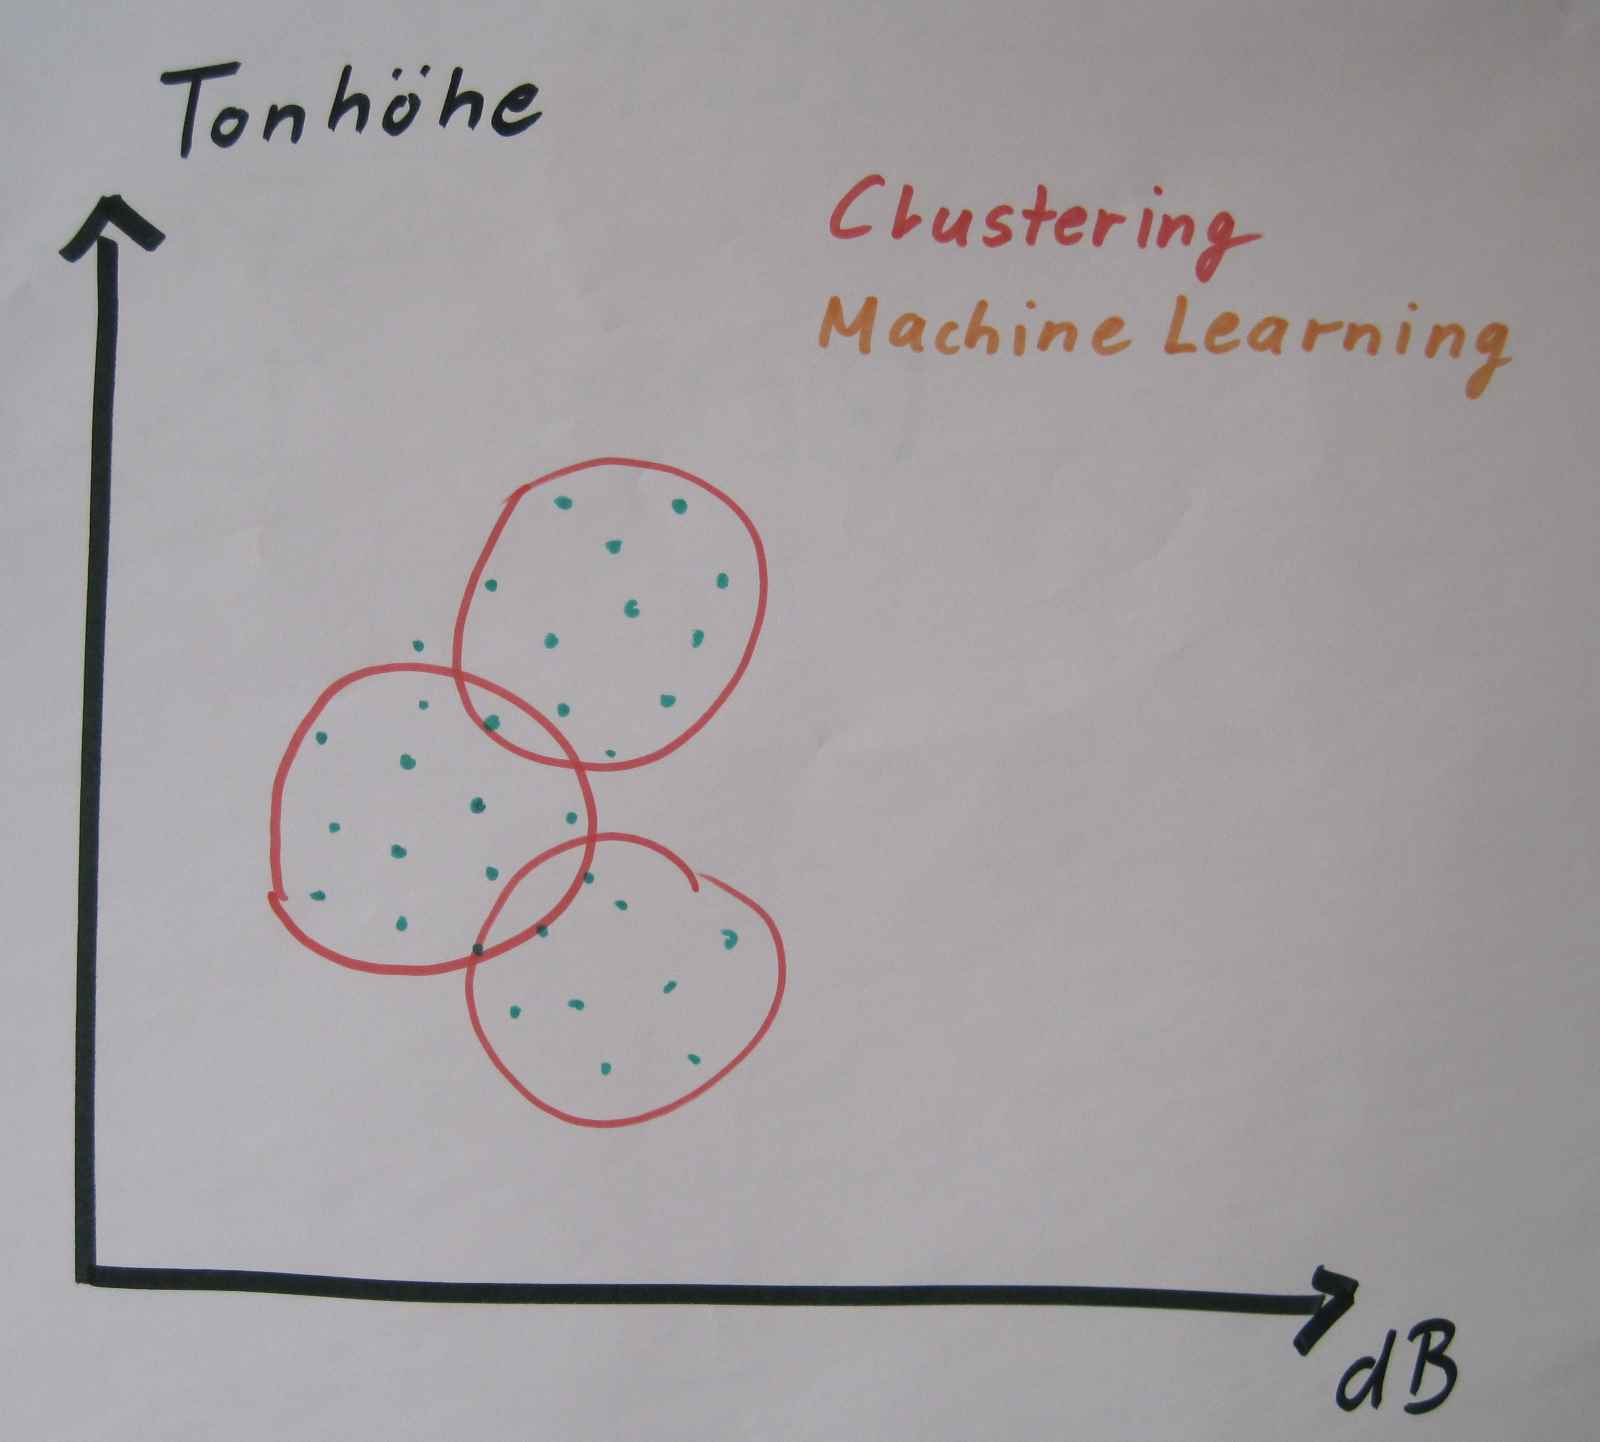 Clustering, Machine Learning